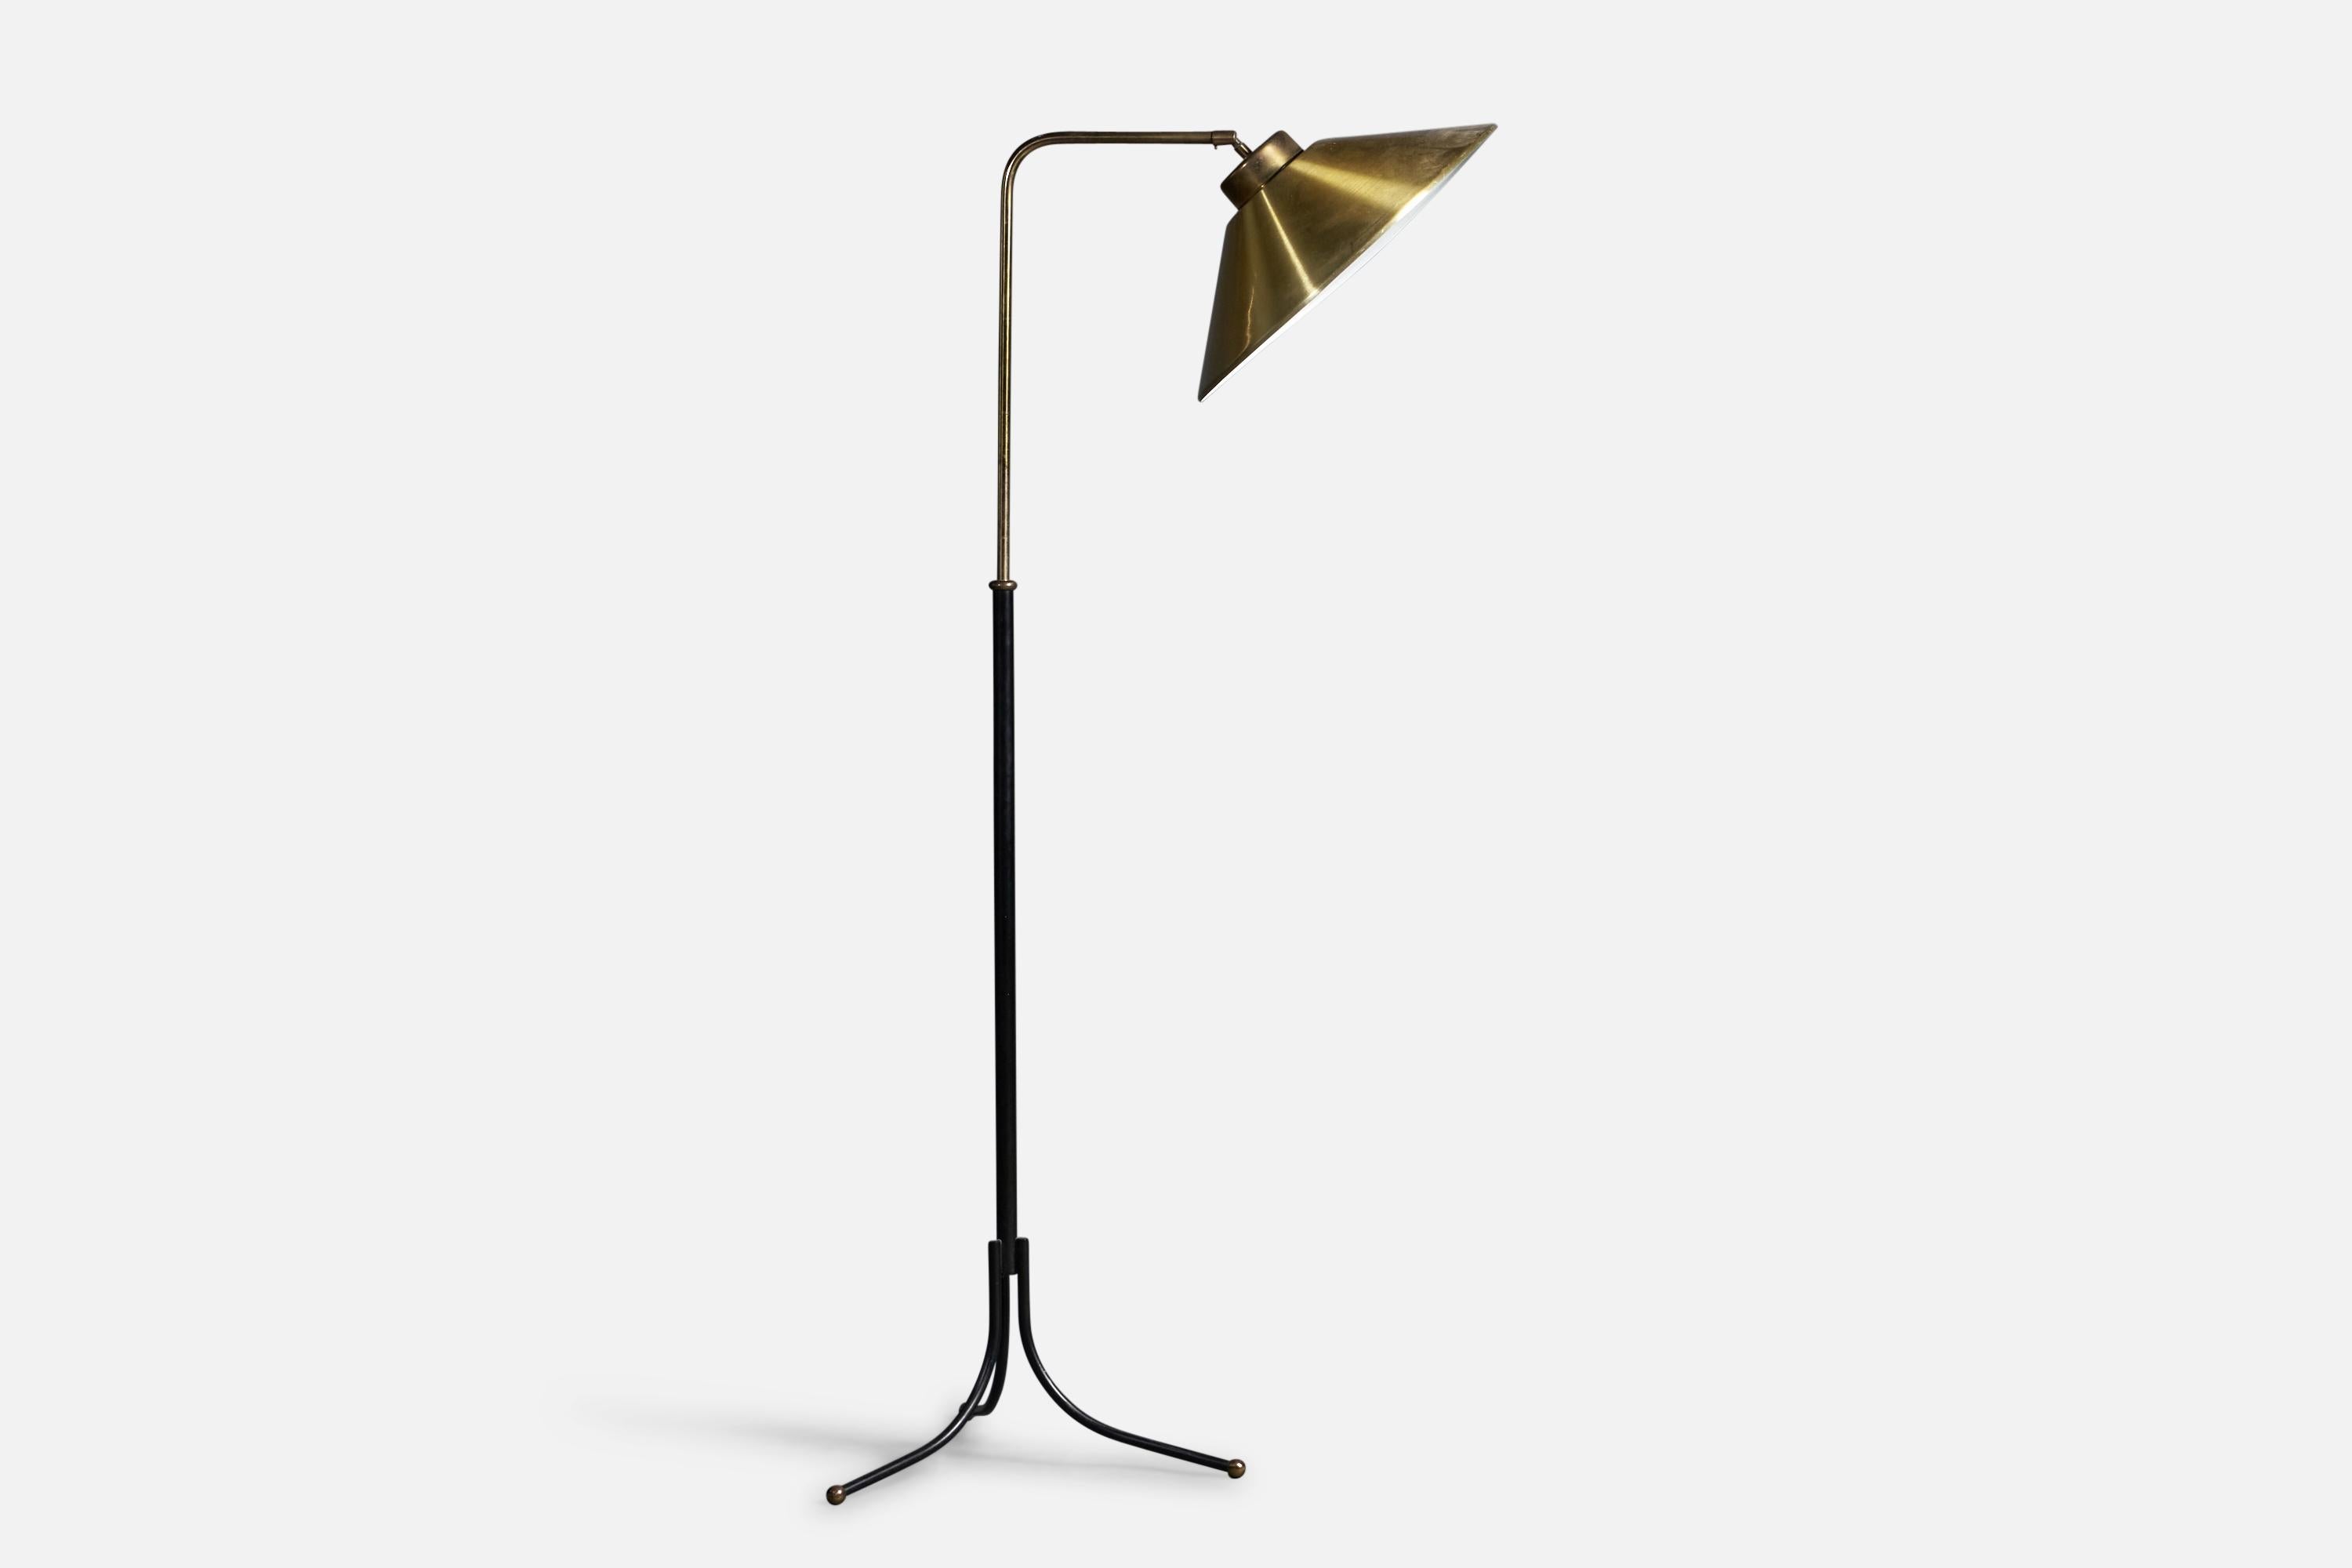 An adjustable brass and black-lacquered metal floor lamp designed and produced by Josef Frank, Sweden, c. 1950s

Overall Dimensions: 54